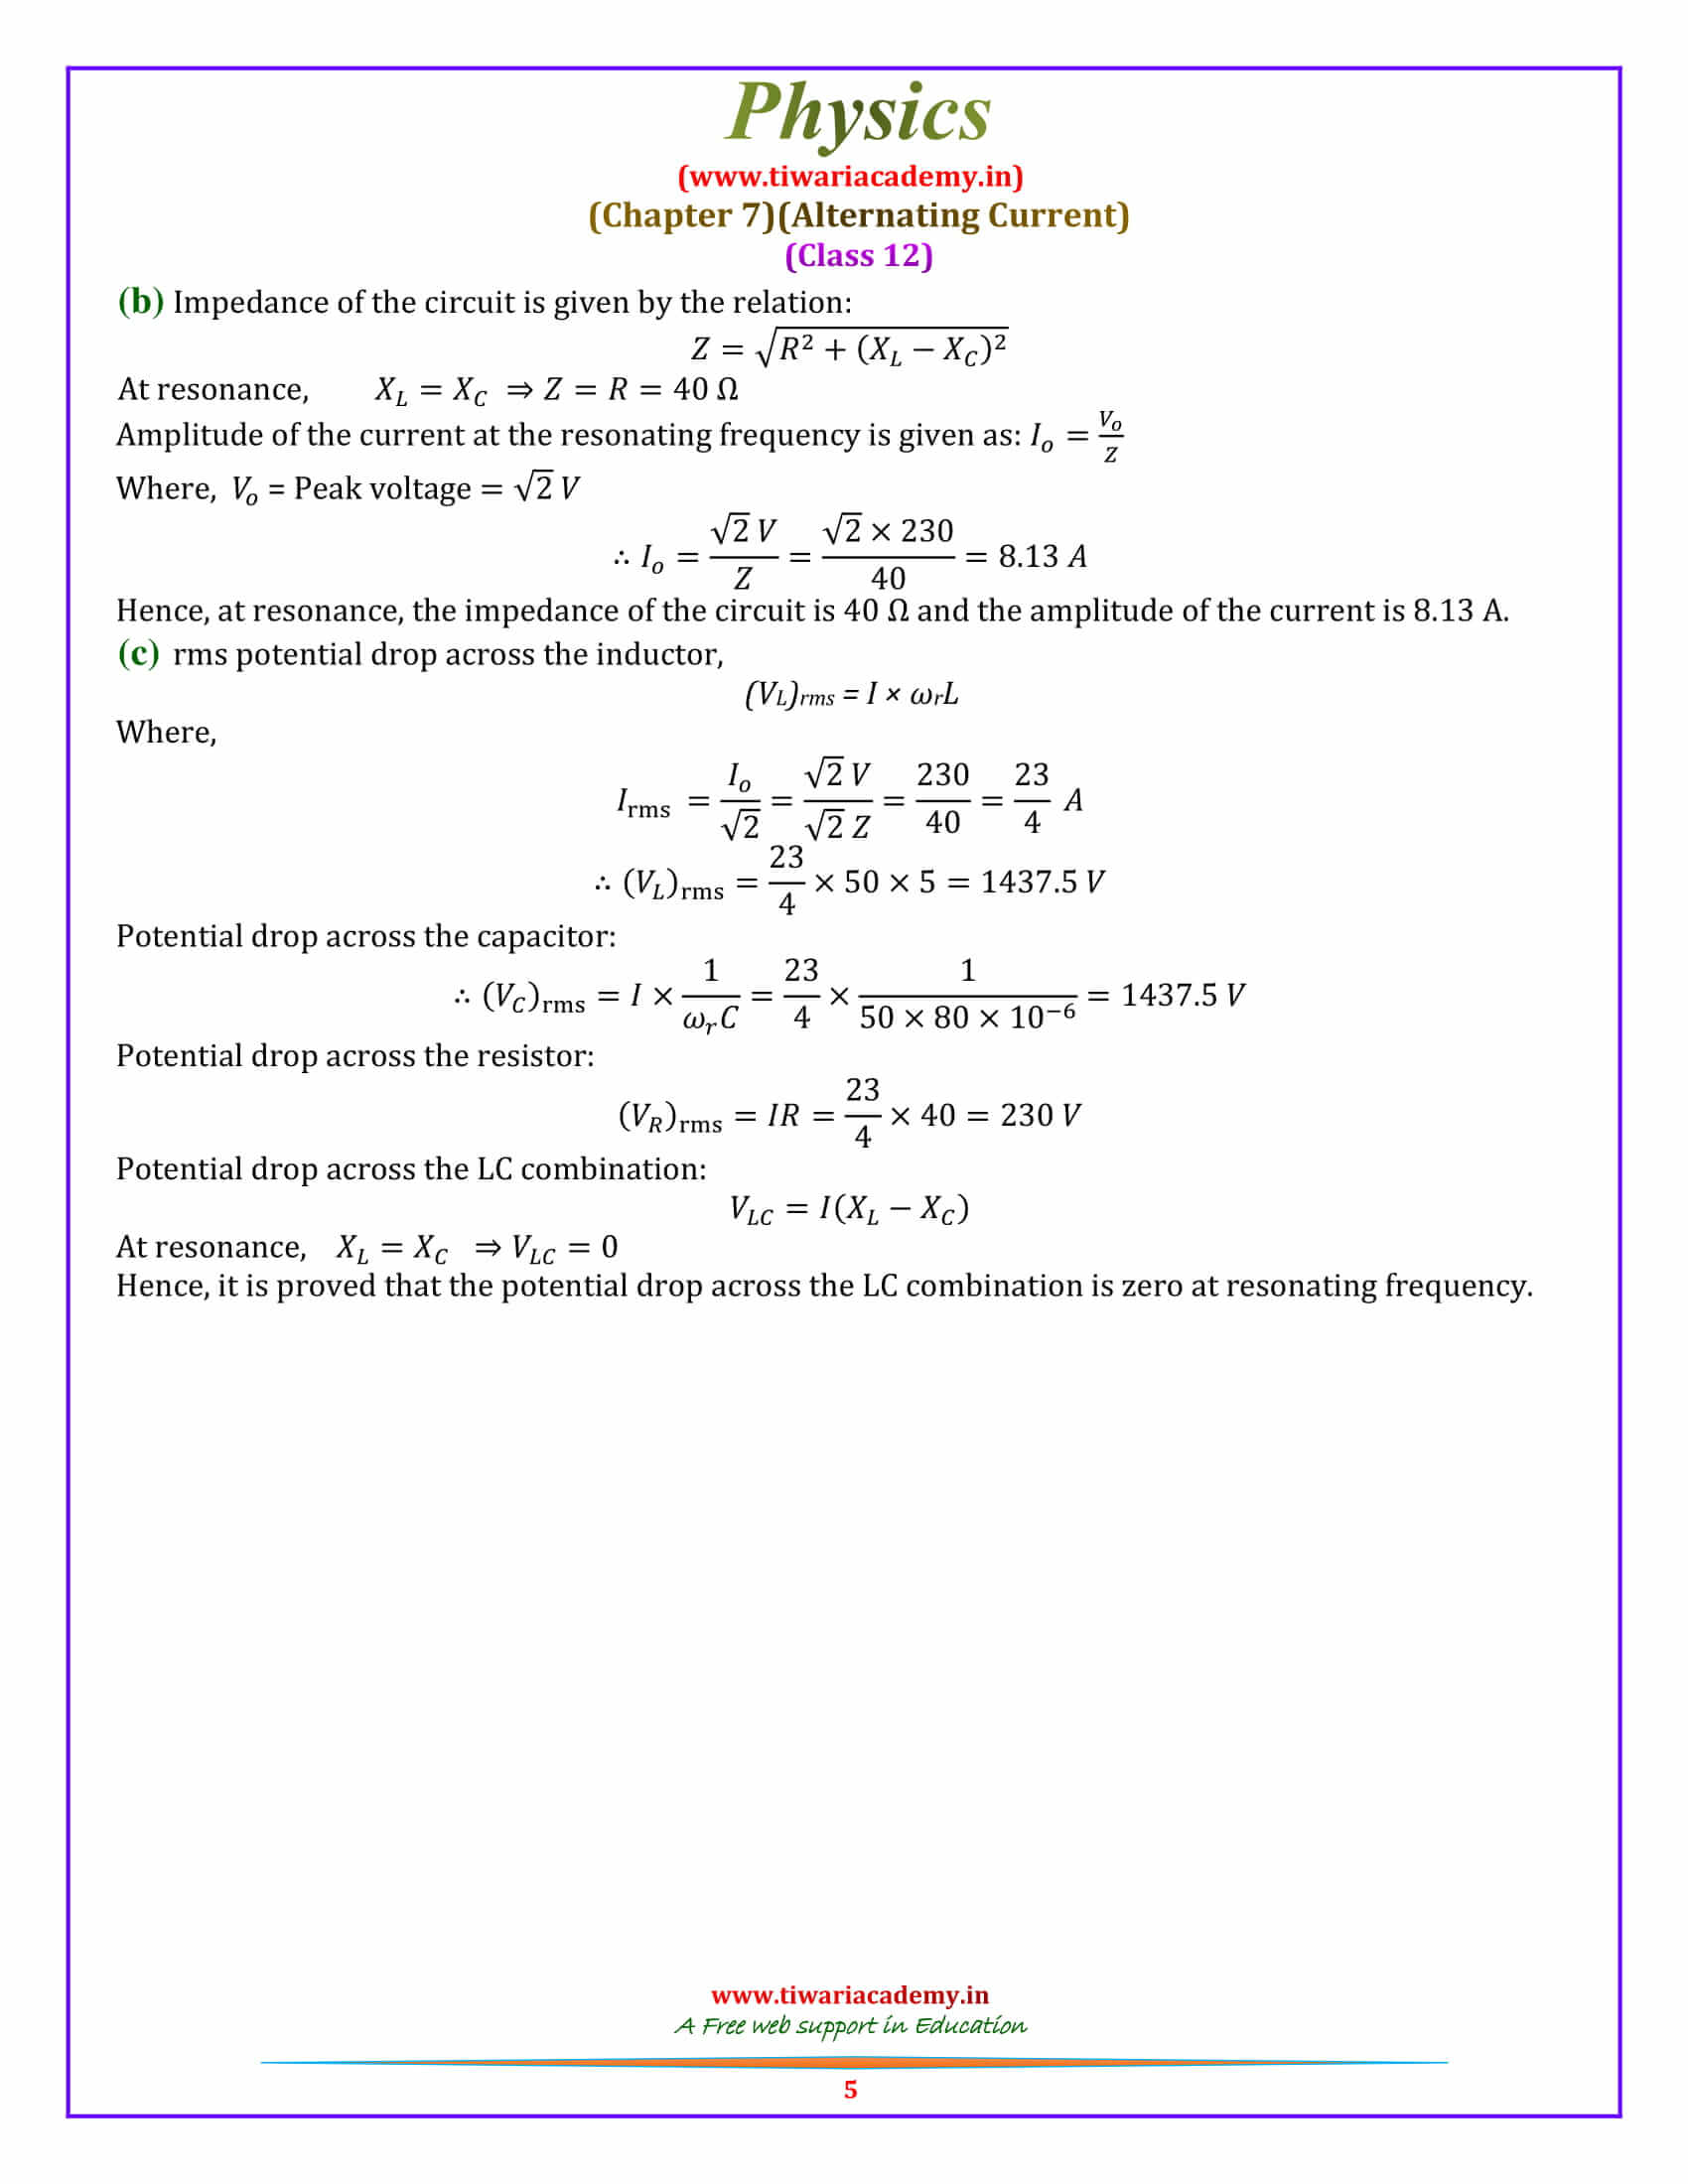 NCERT Solutions for Class 12 Physics Chapter 7 Alternating Current download free pdf